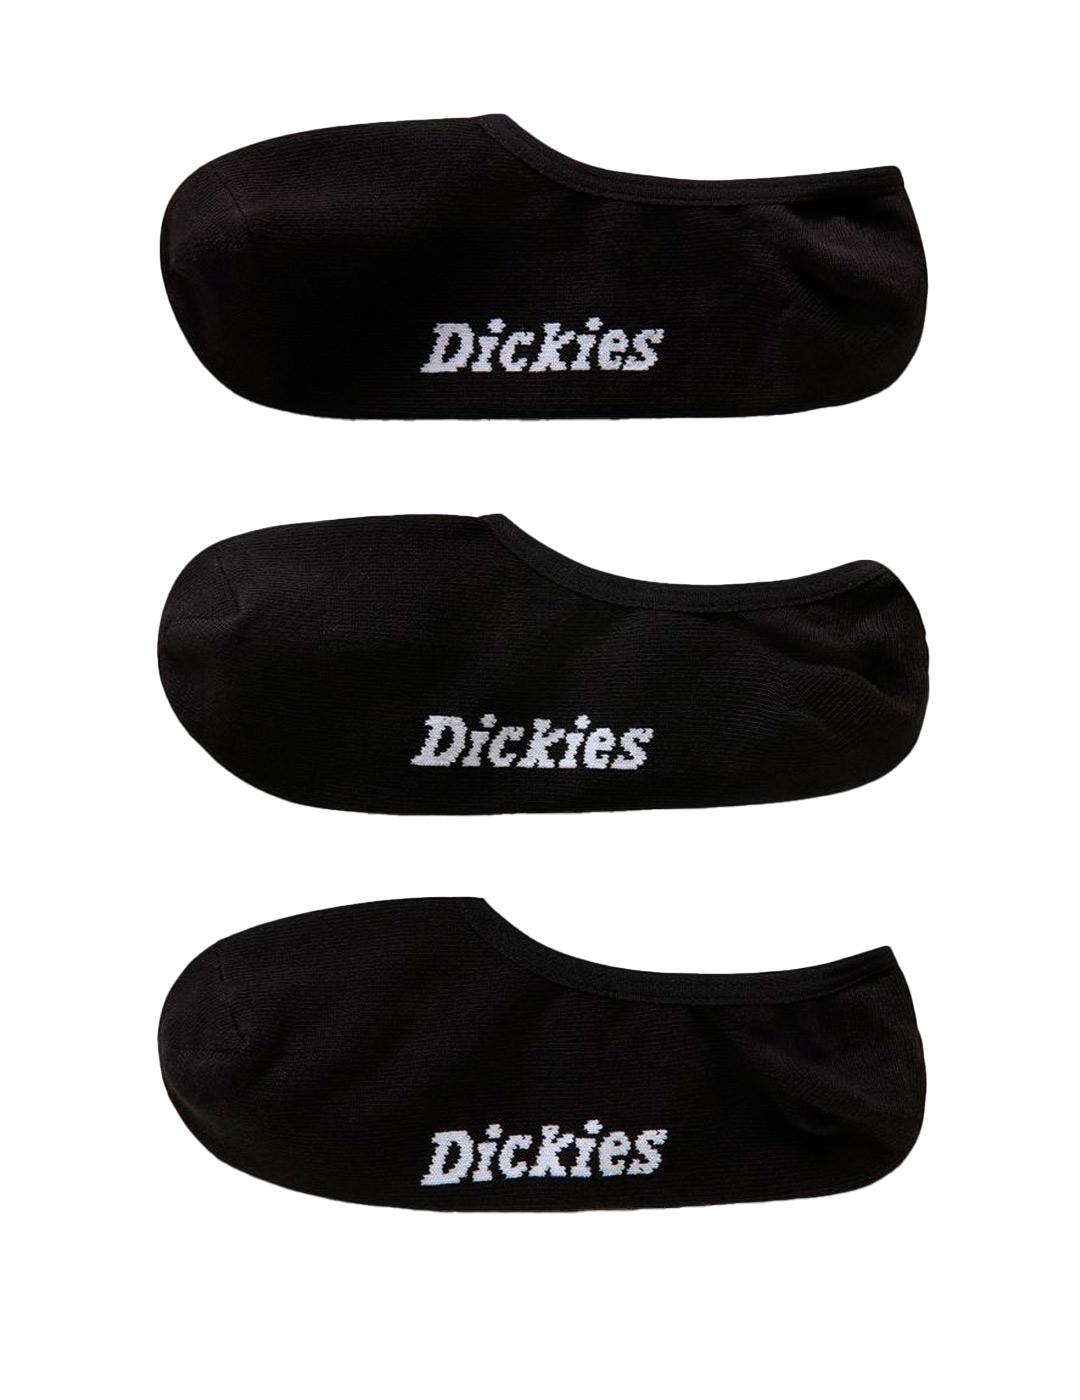 Calcetines Dickies invisibles Negro (3 pares)